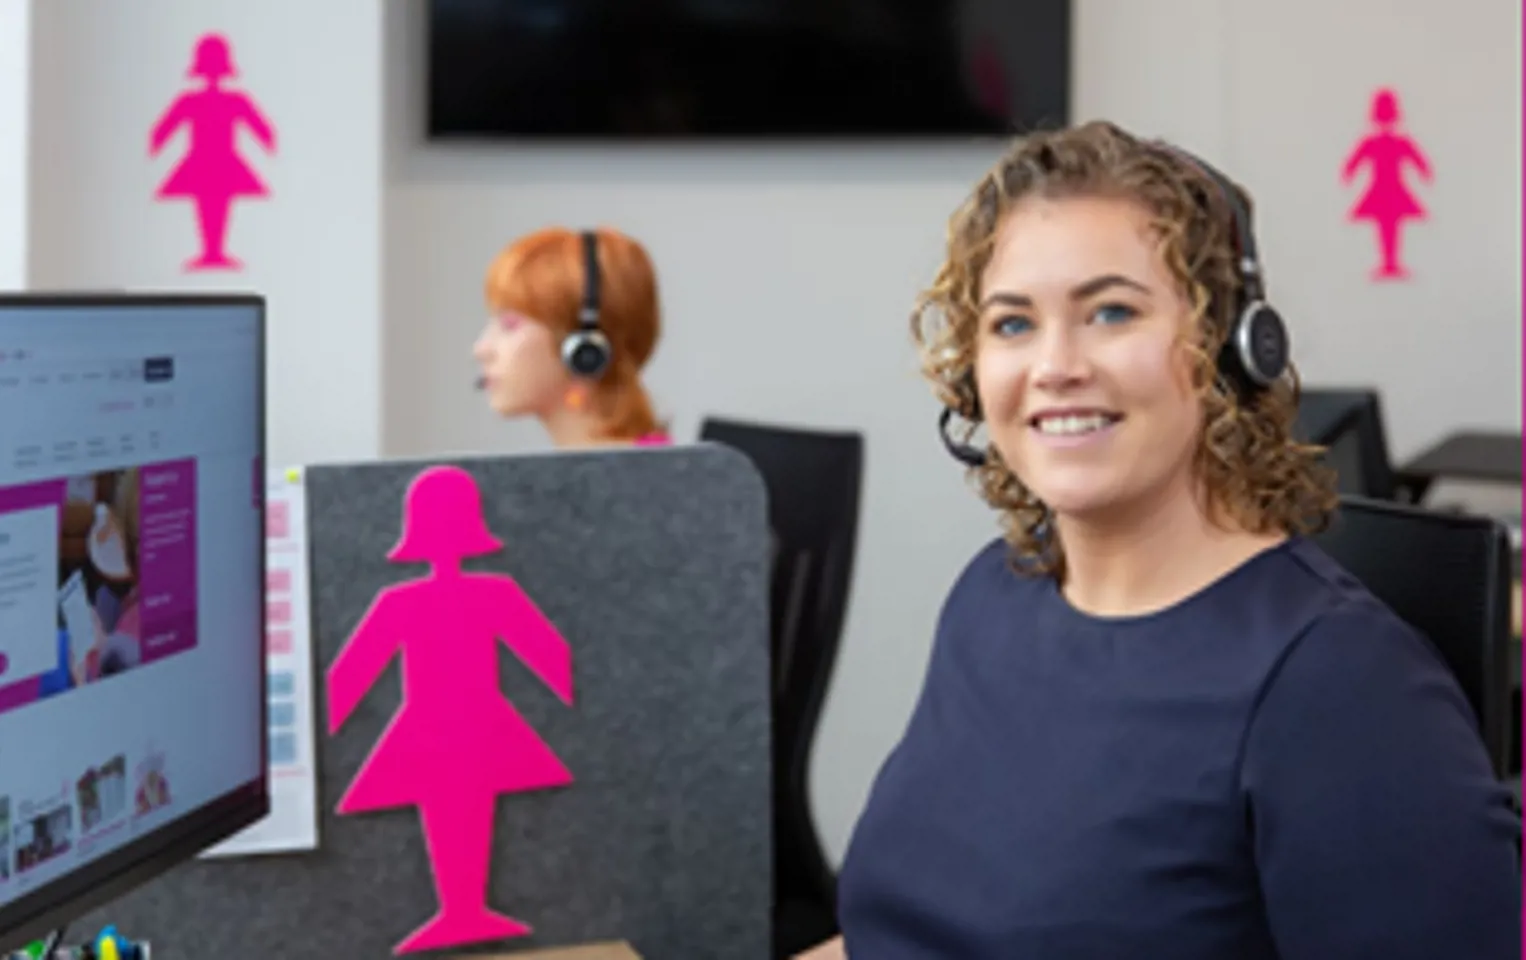 A young woman with brown curly hair is smiling at the camera from her office cubicle. She is wearing headphones and in the background are several Pink Lady cutouts  